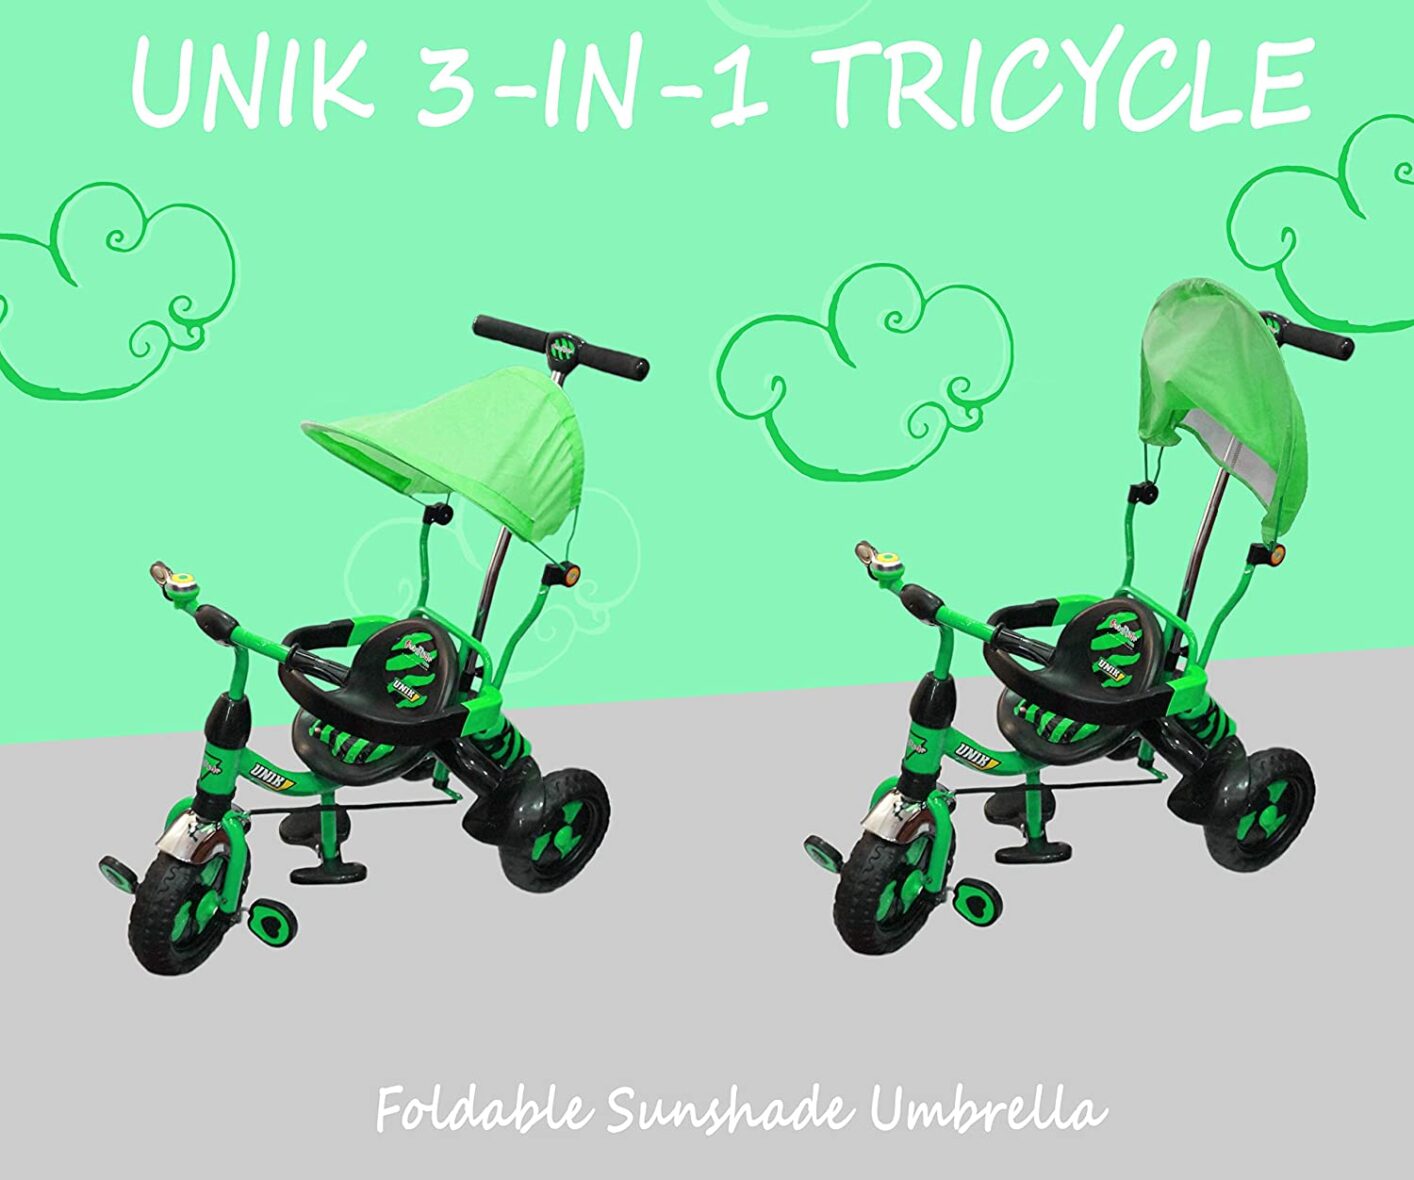 Fun Ride Baby Tricycle Unik Deluxe Rider 1 to 4 Years (9)